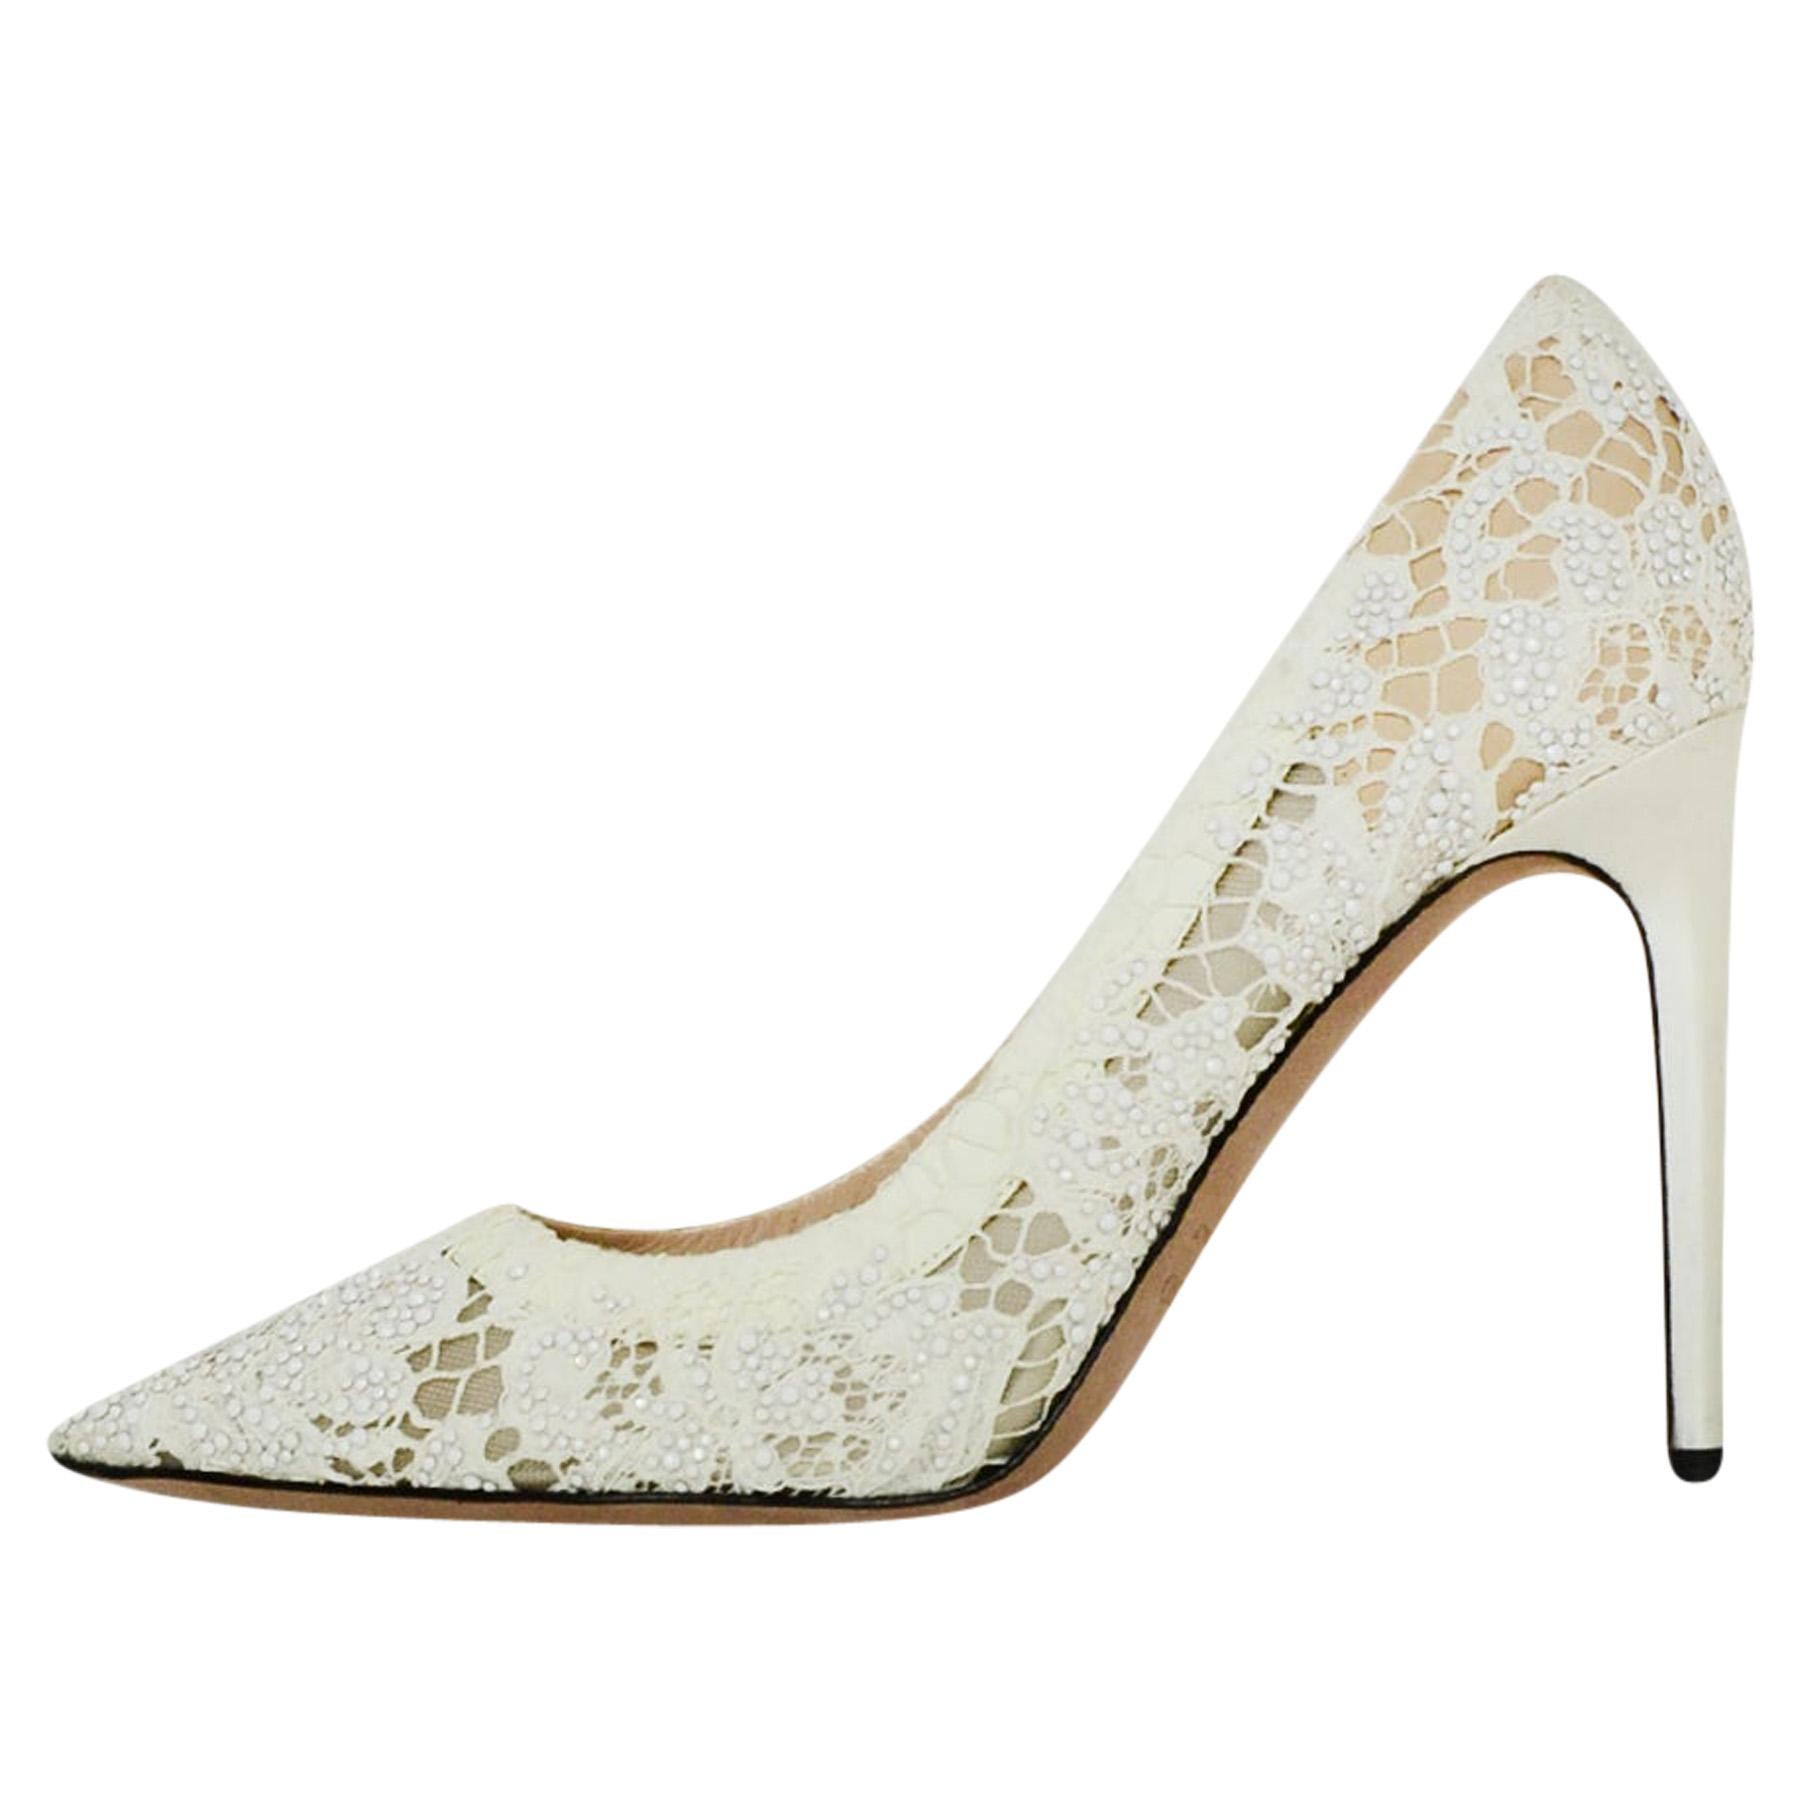 Valentino off-White Lace/Crystal Point Toe Pumps sz 39 rt. $1, 695